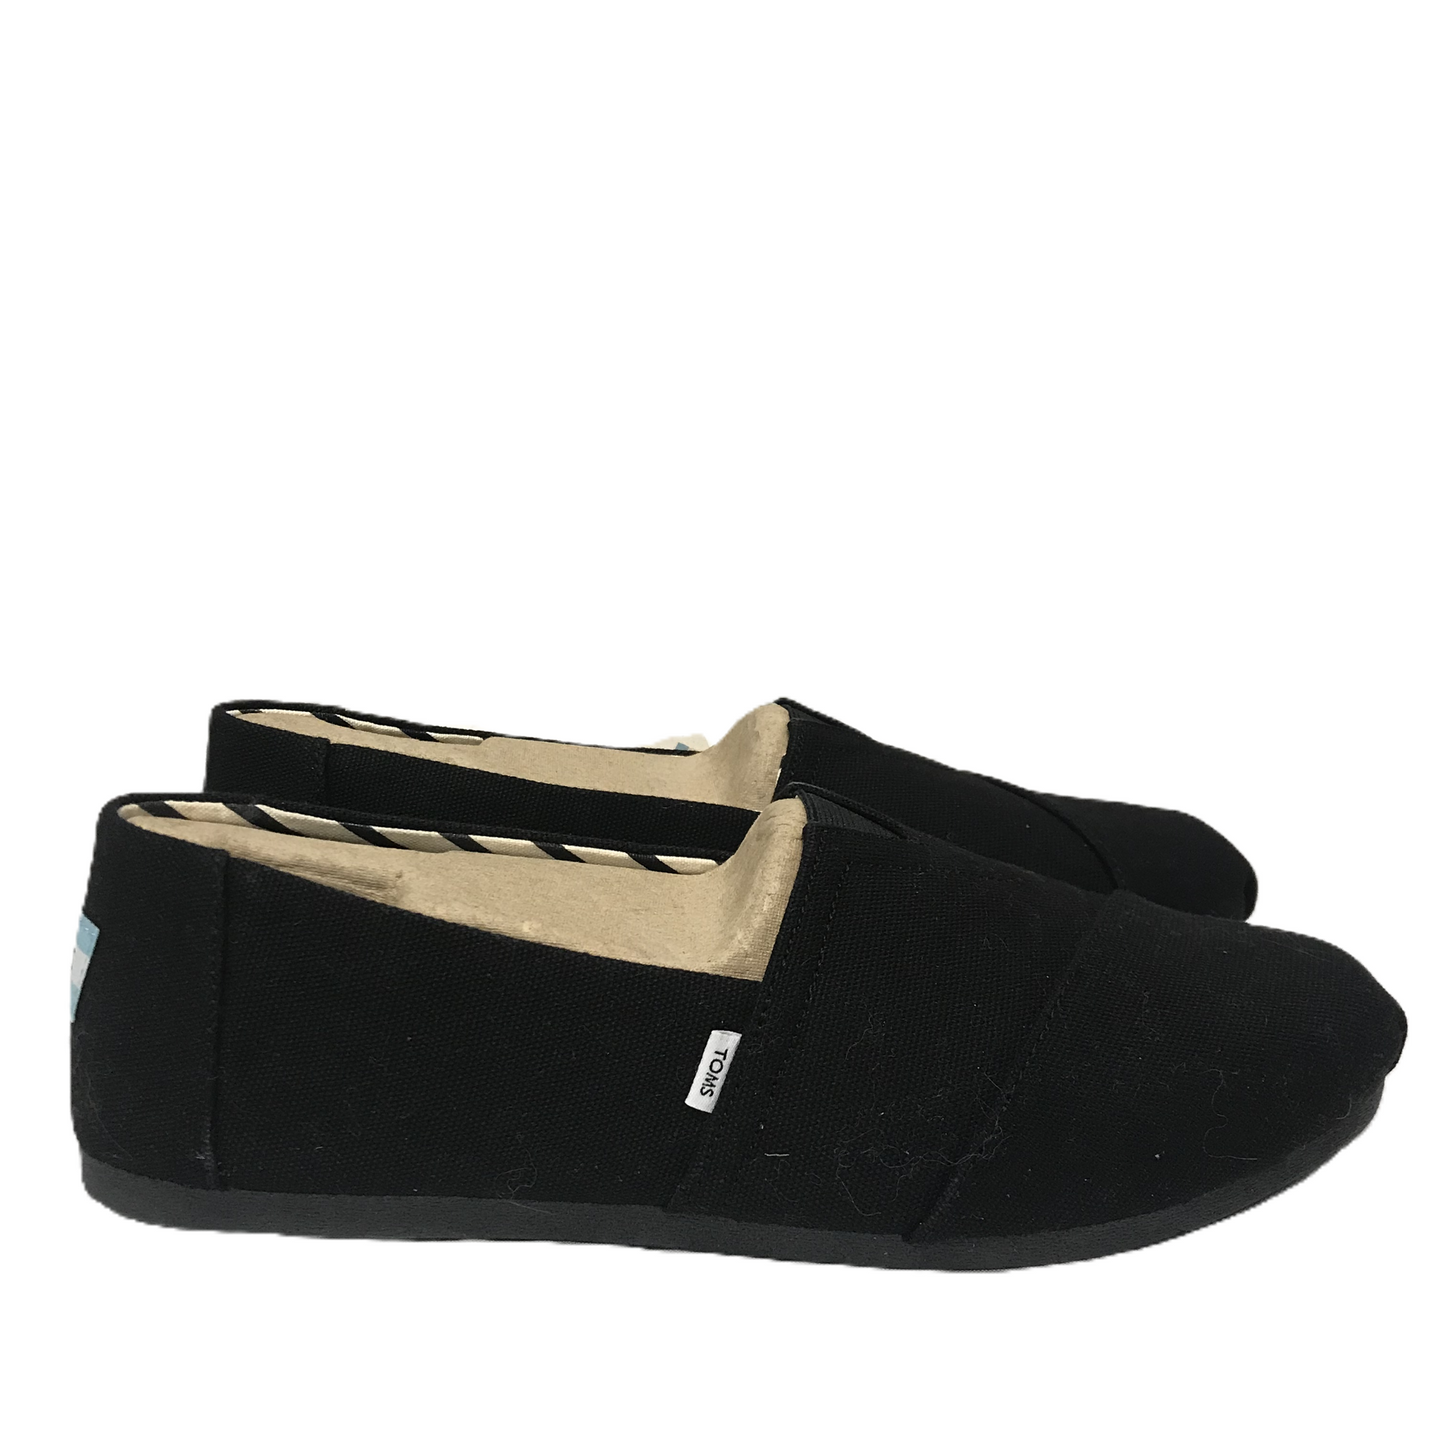 Black Shoes Flats By Toms, Size: 10